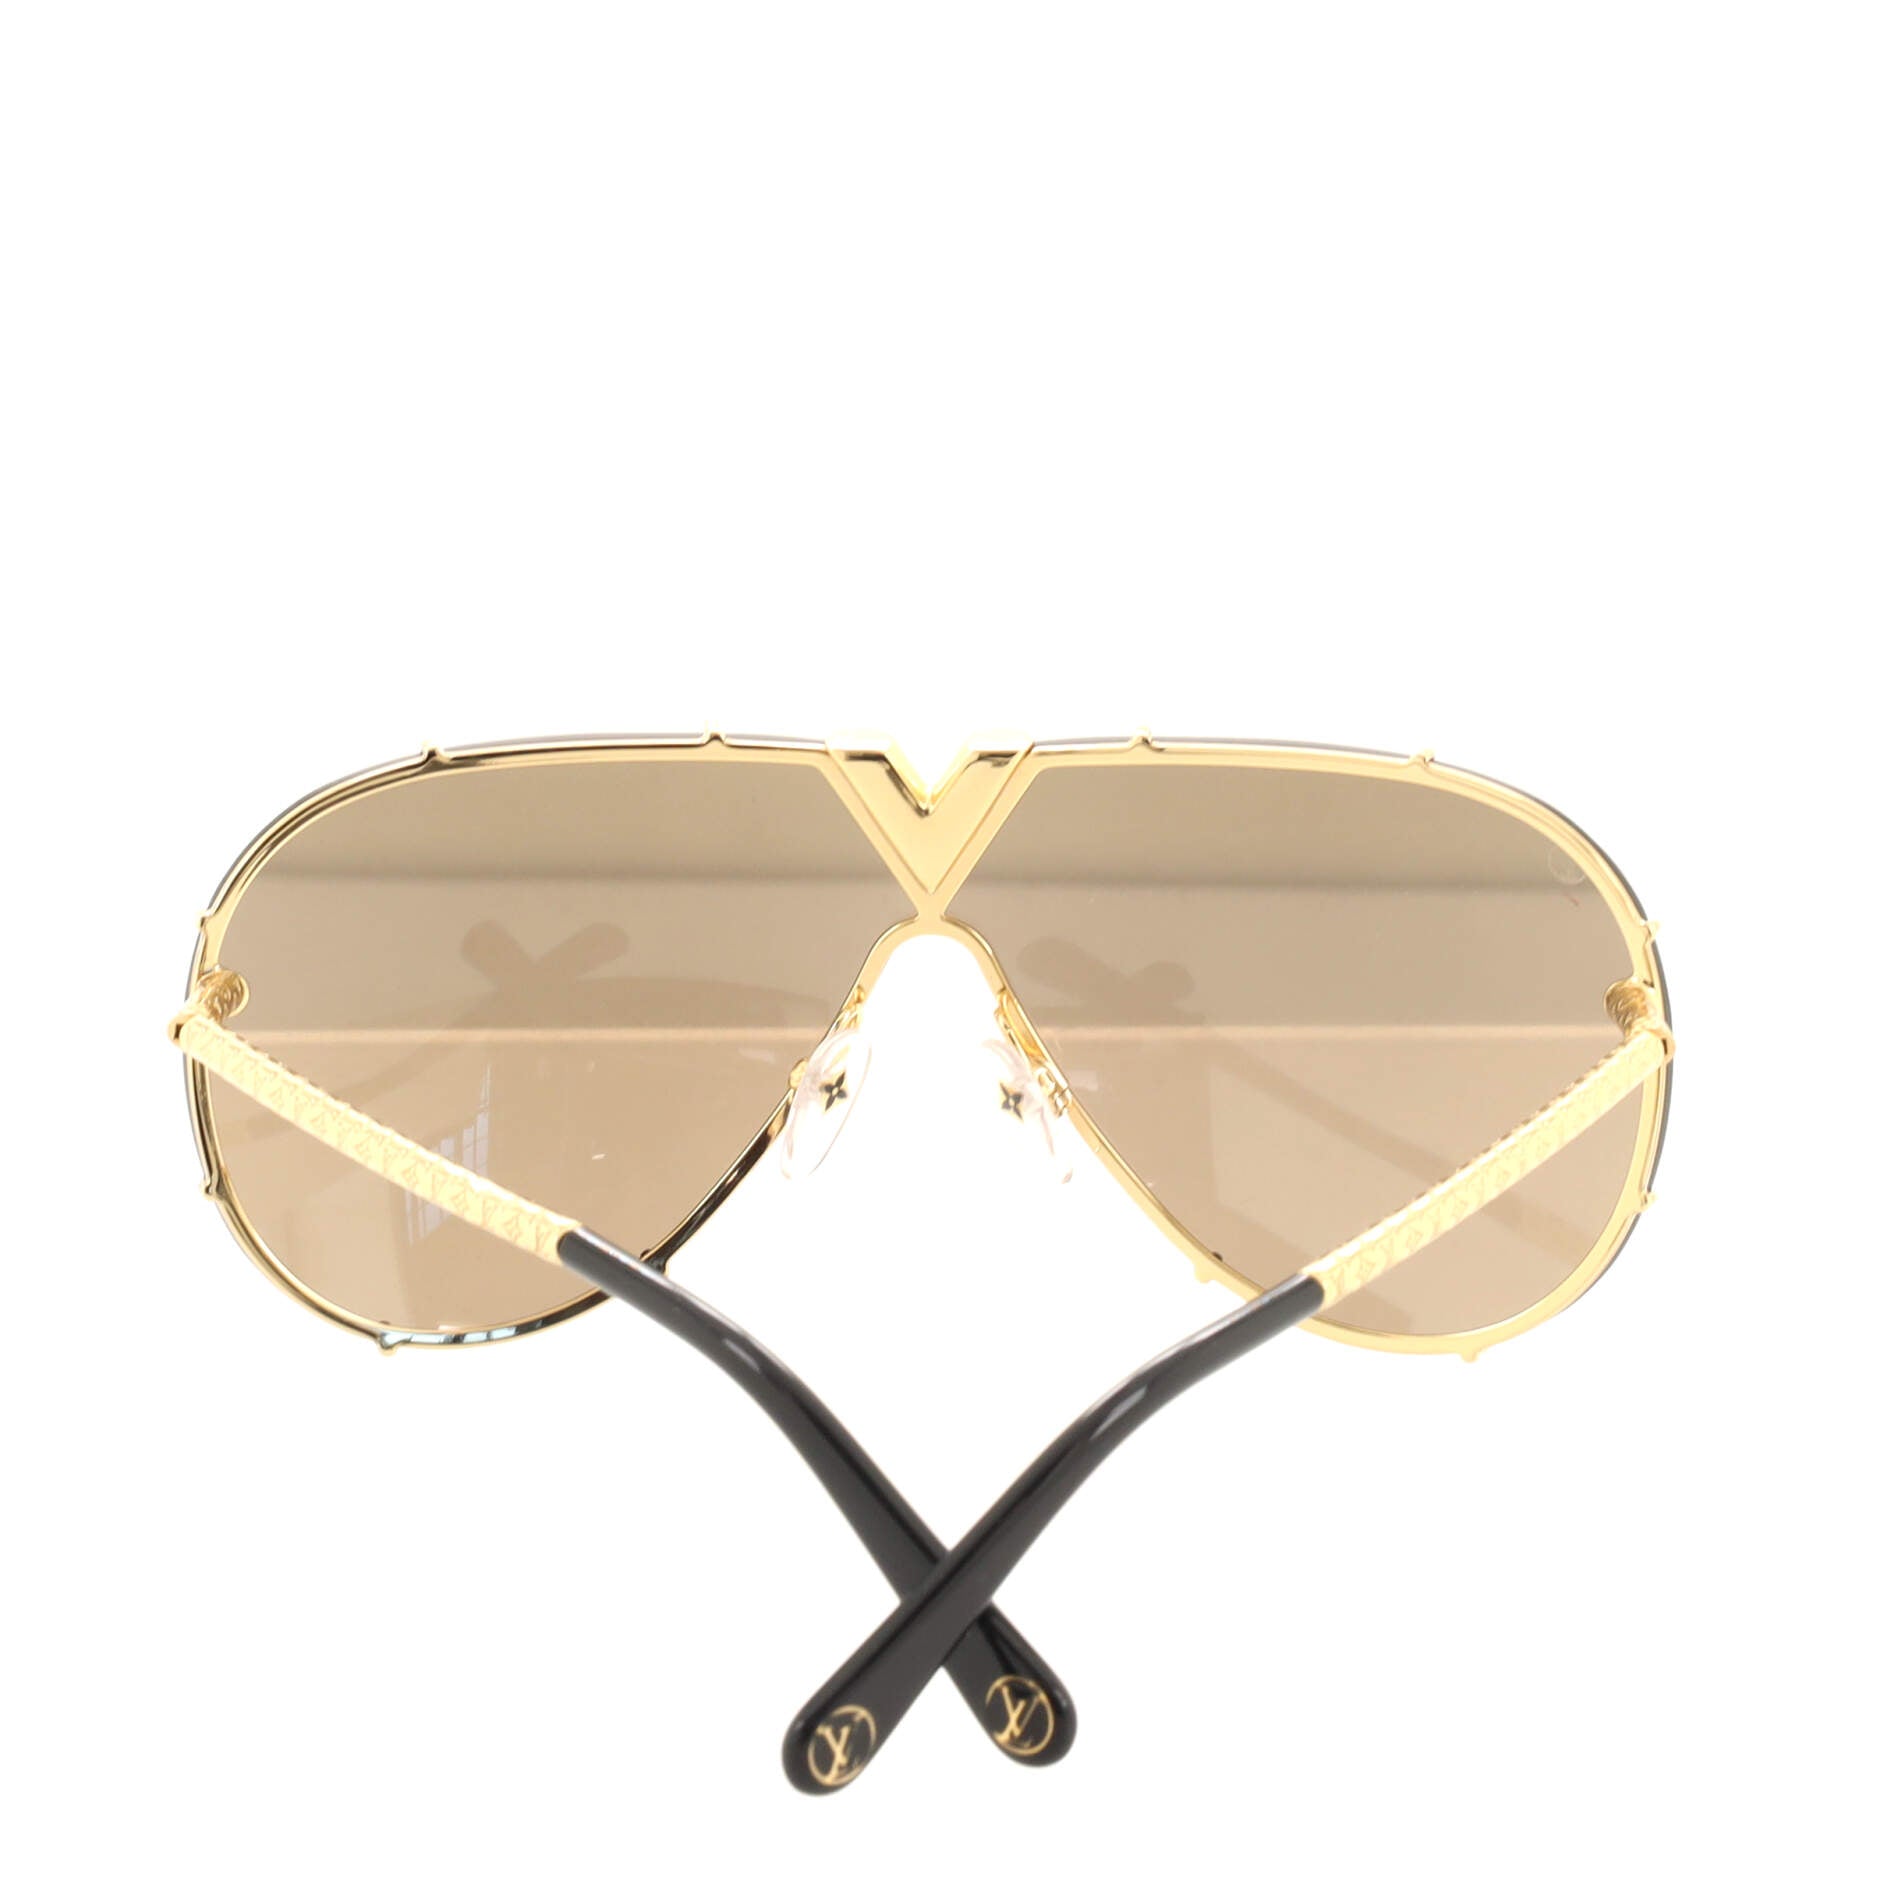 Louis Vuitton, Accessories, Louis Vuitton Lv Drive Aviator Sunglasses  Acetate And Metal With Crystals